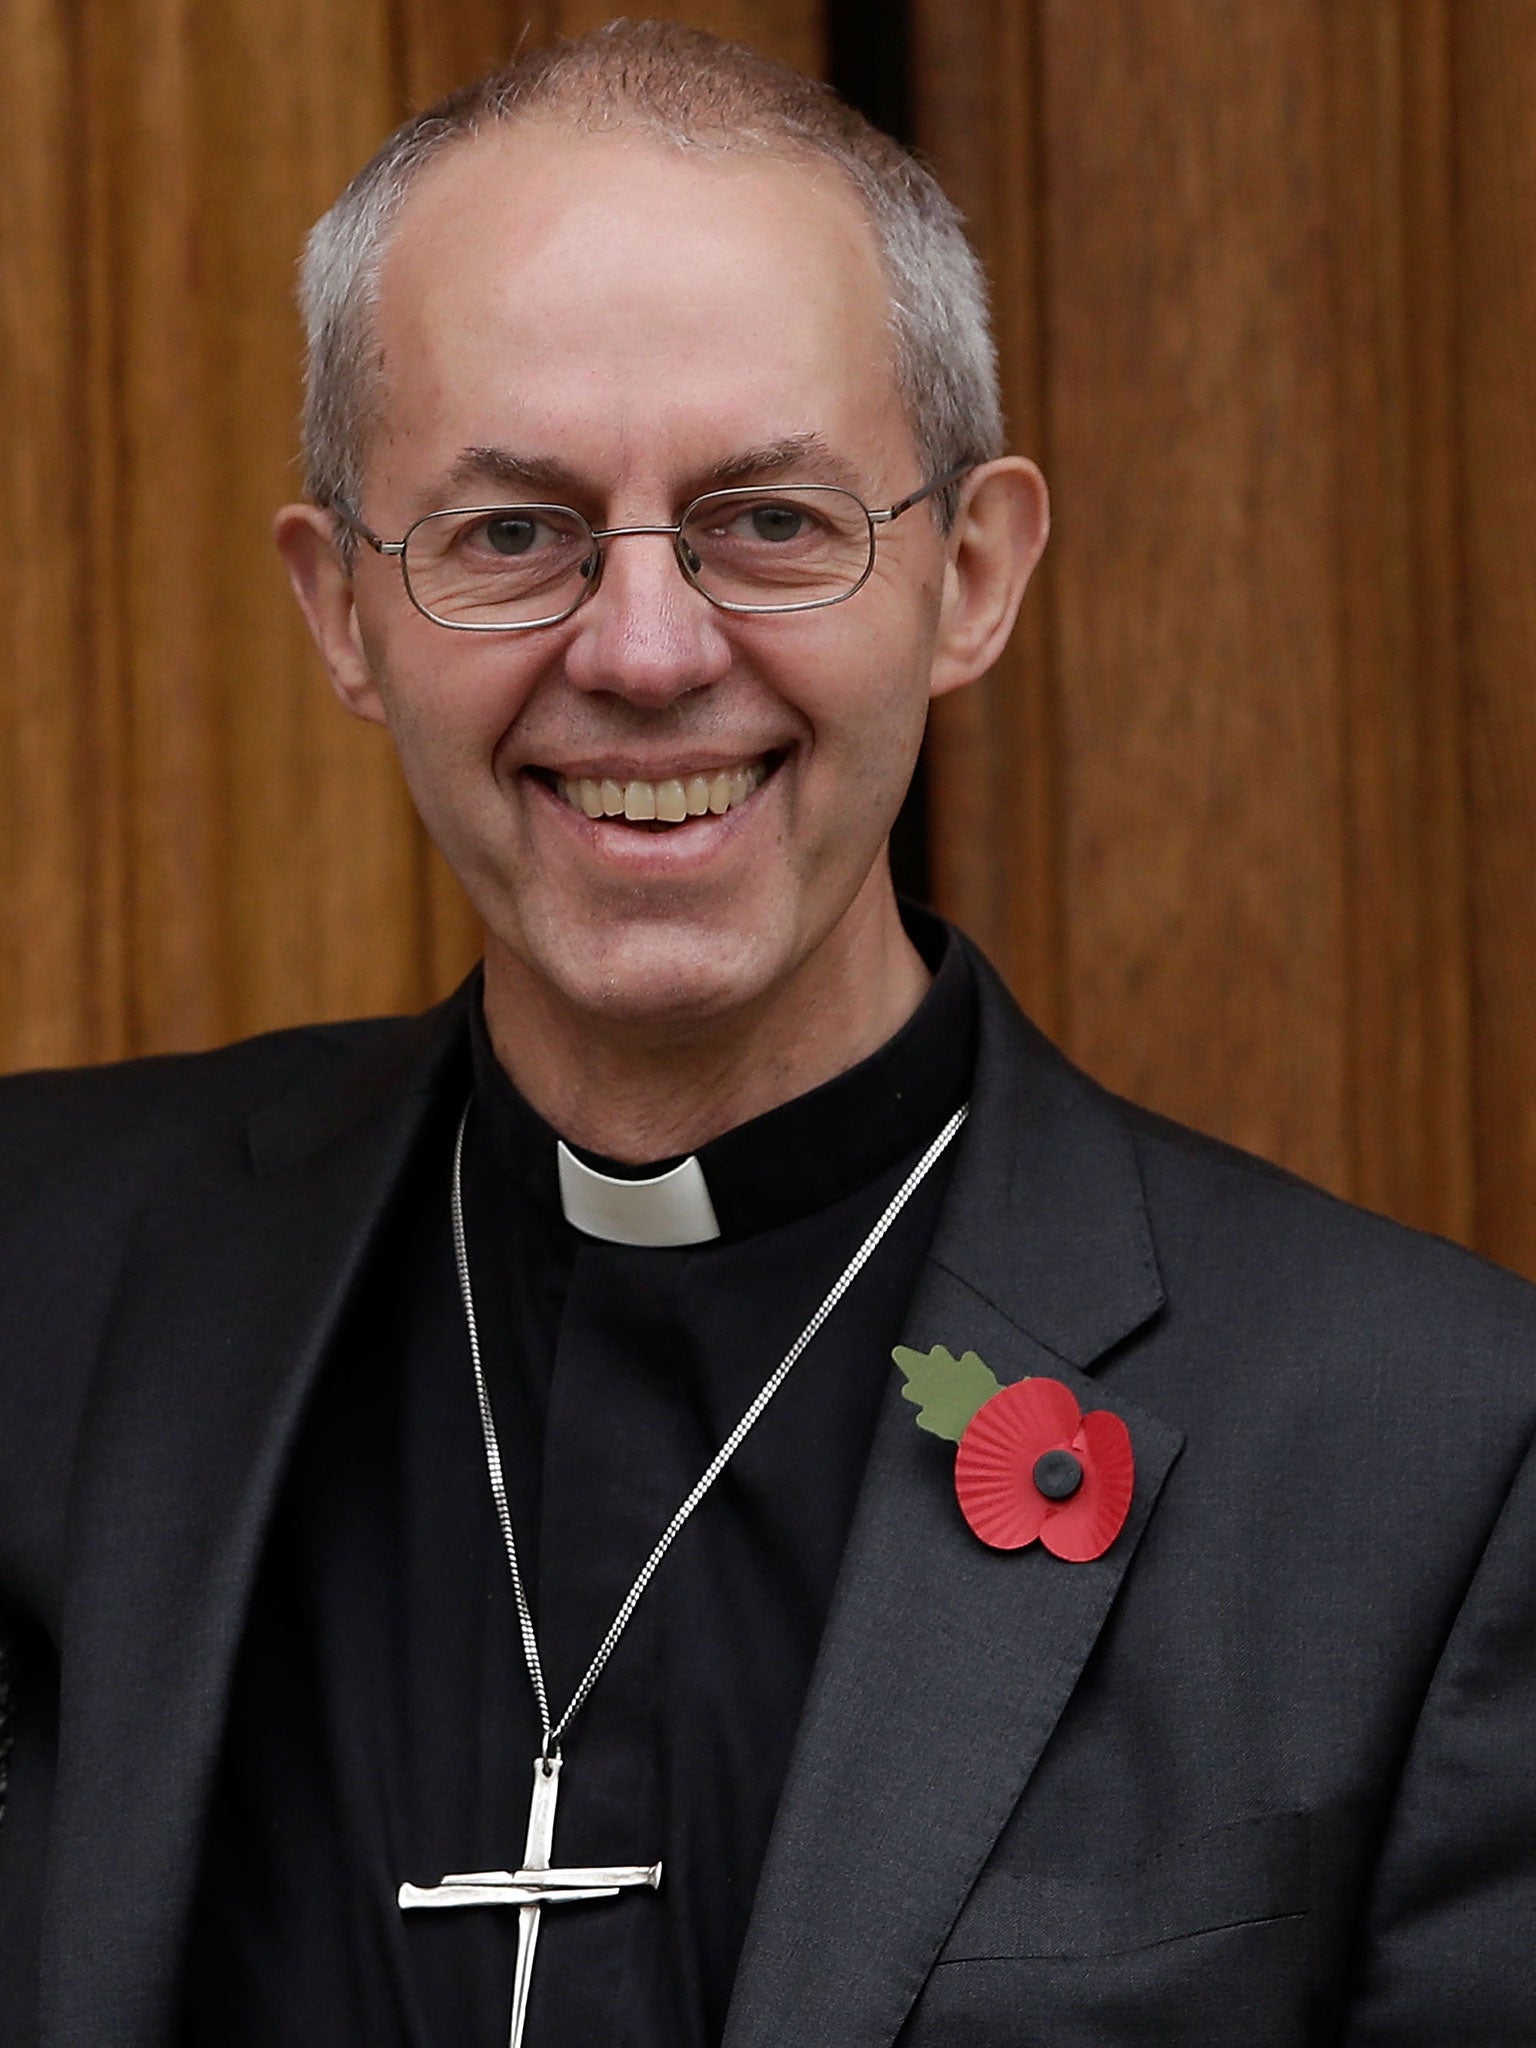 Justin Welby, the Archbishop of Canterbury, has warned that expensive Christmas presents could damage relationships if they leave people short of money